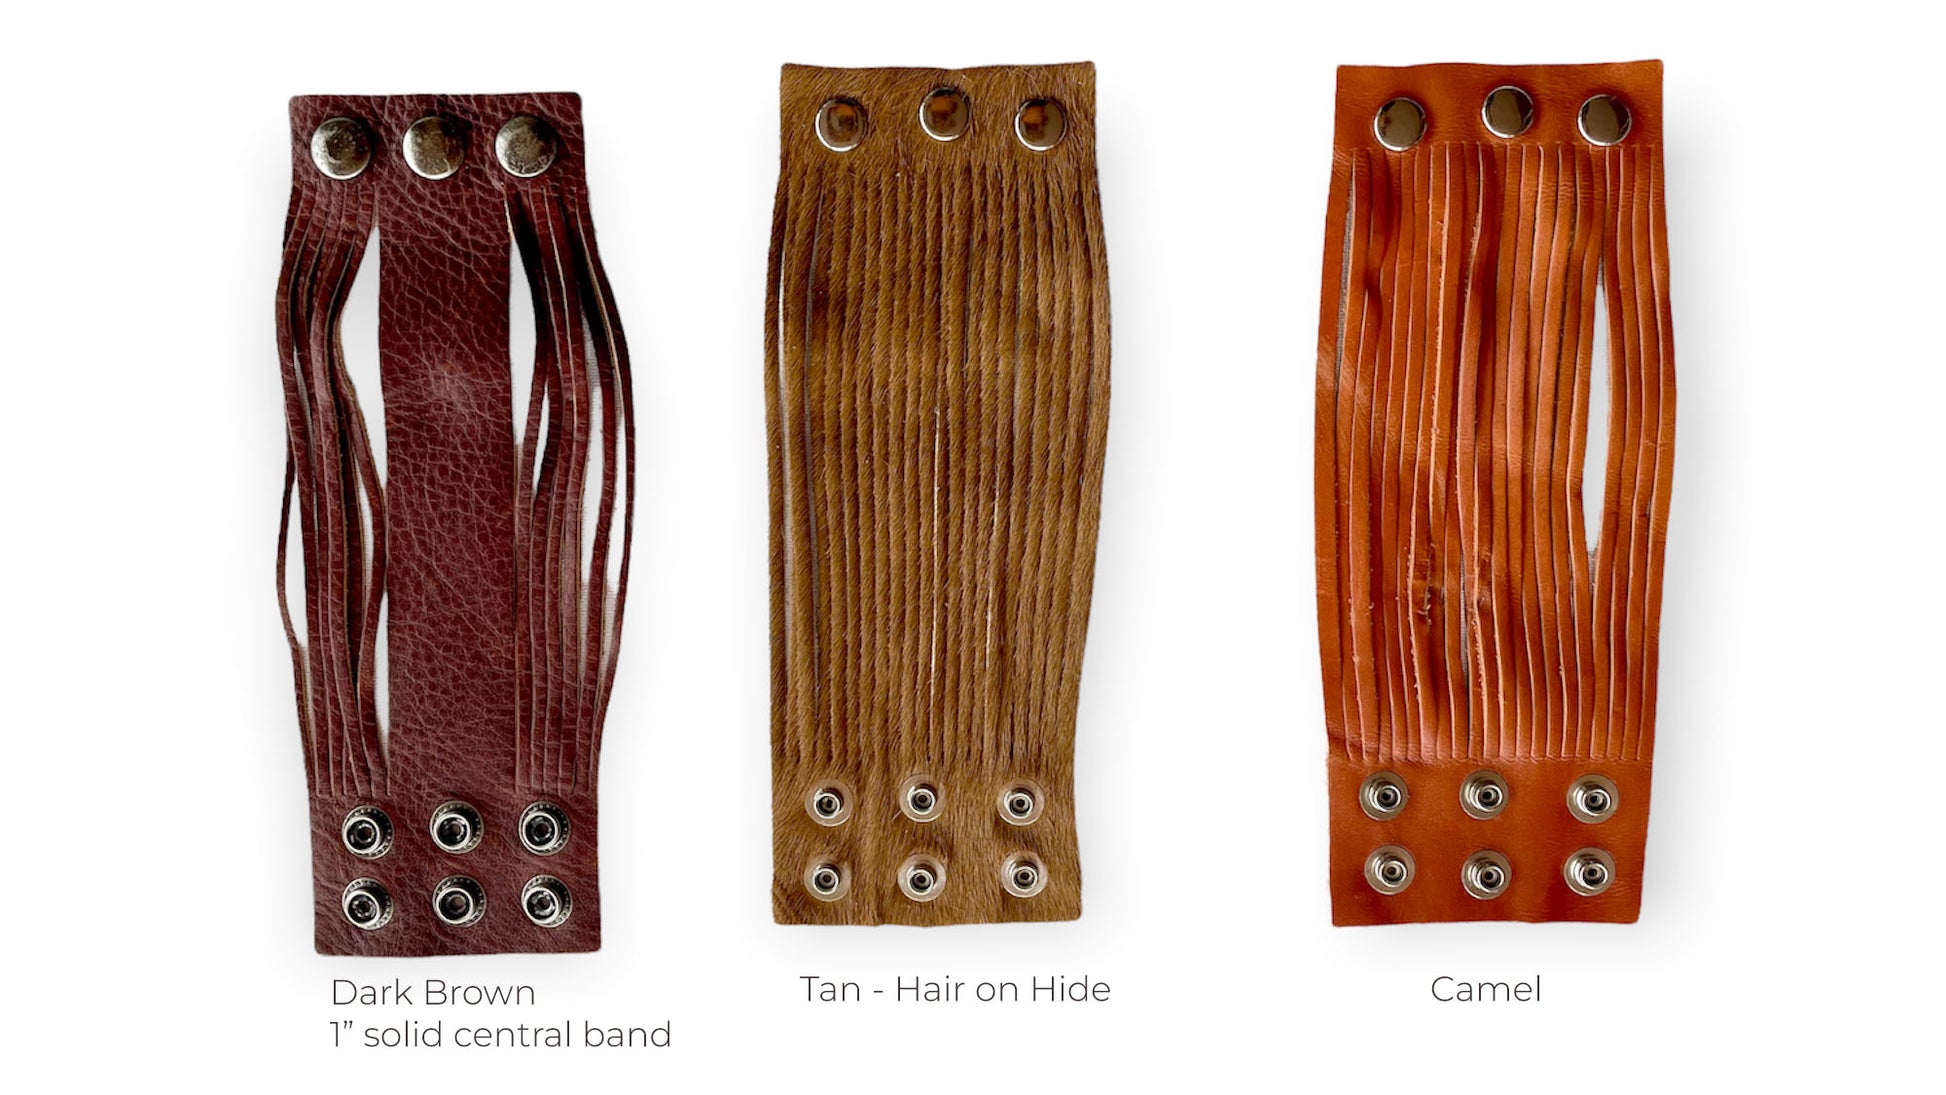 3" wide leather bracelets, in camel, tan (hair on hide), dark brown (1" solid central band)